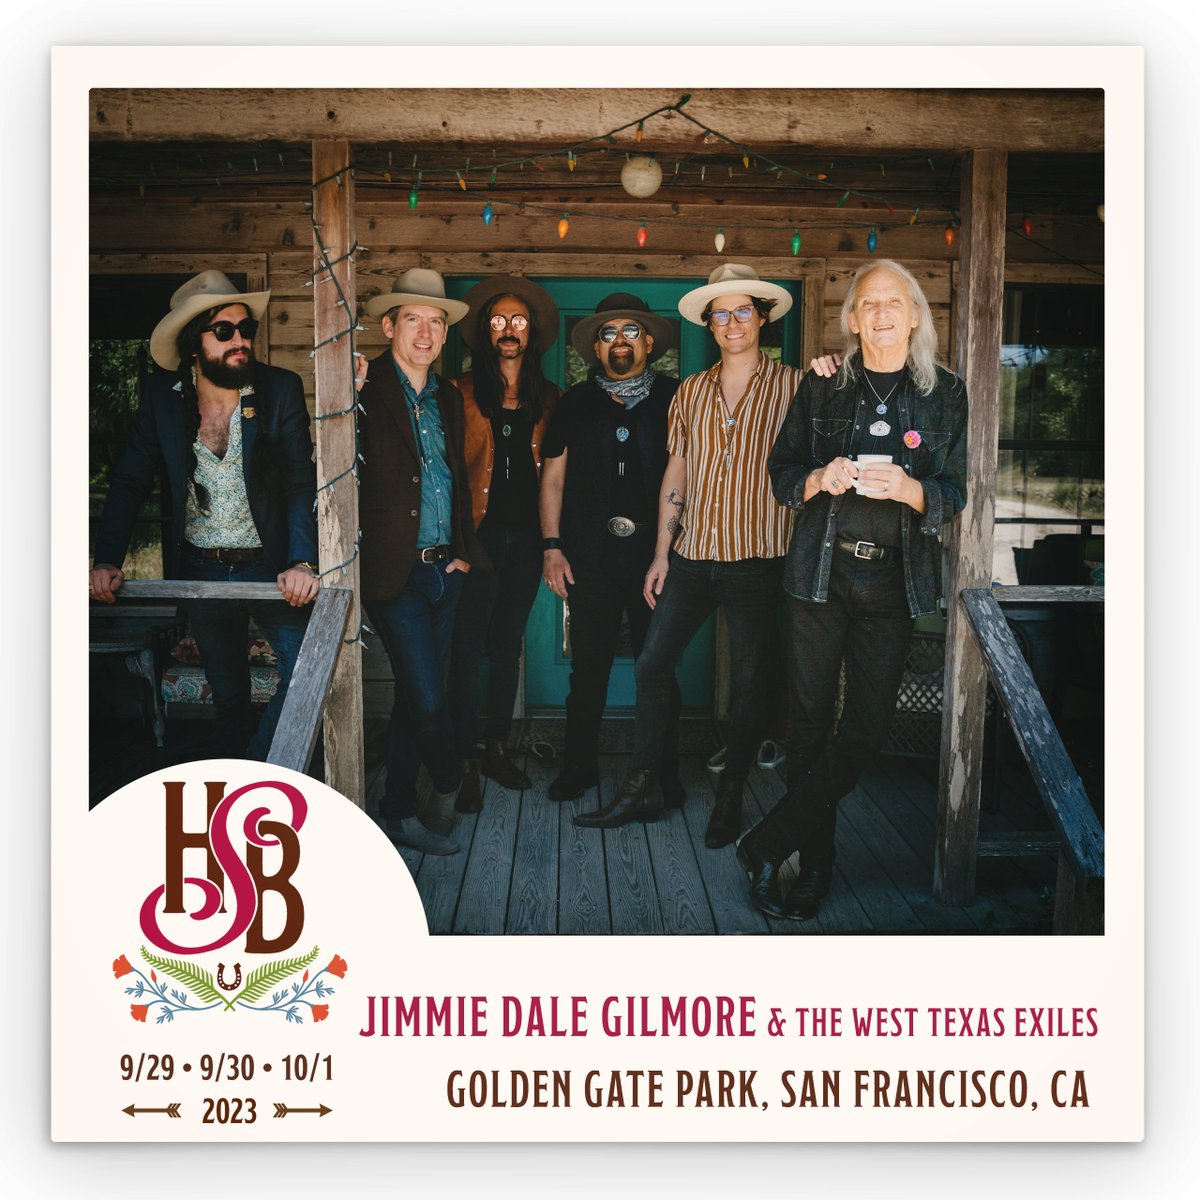 Jimmie Dale Gilmore, so often  a beloved part of HSB over the years, returns this year and brings the West Texas Exiles with him. Do not miss this!

#jimmiedalegilmore
#hardlystrictlybluegrass
#hsb23